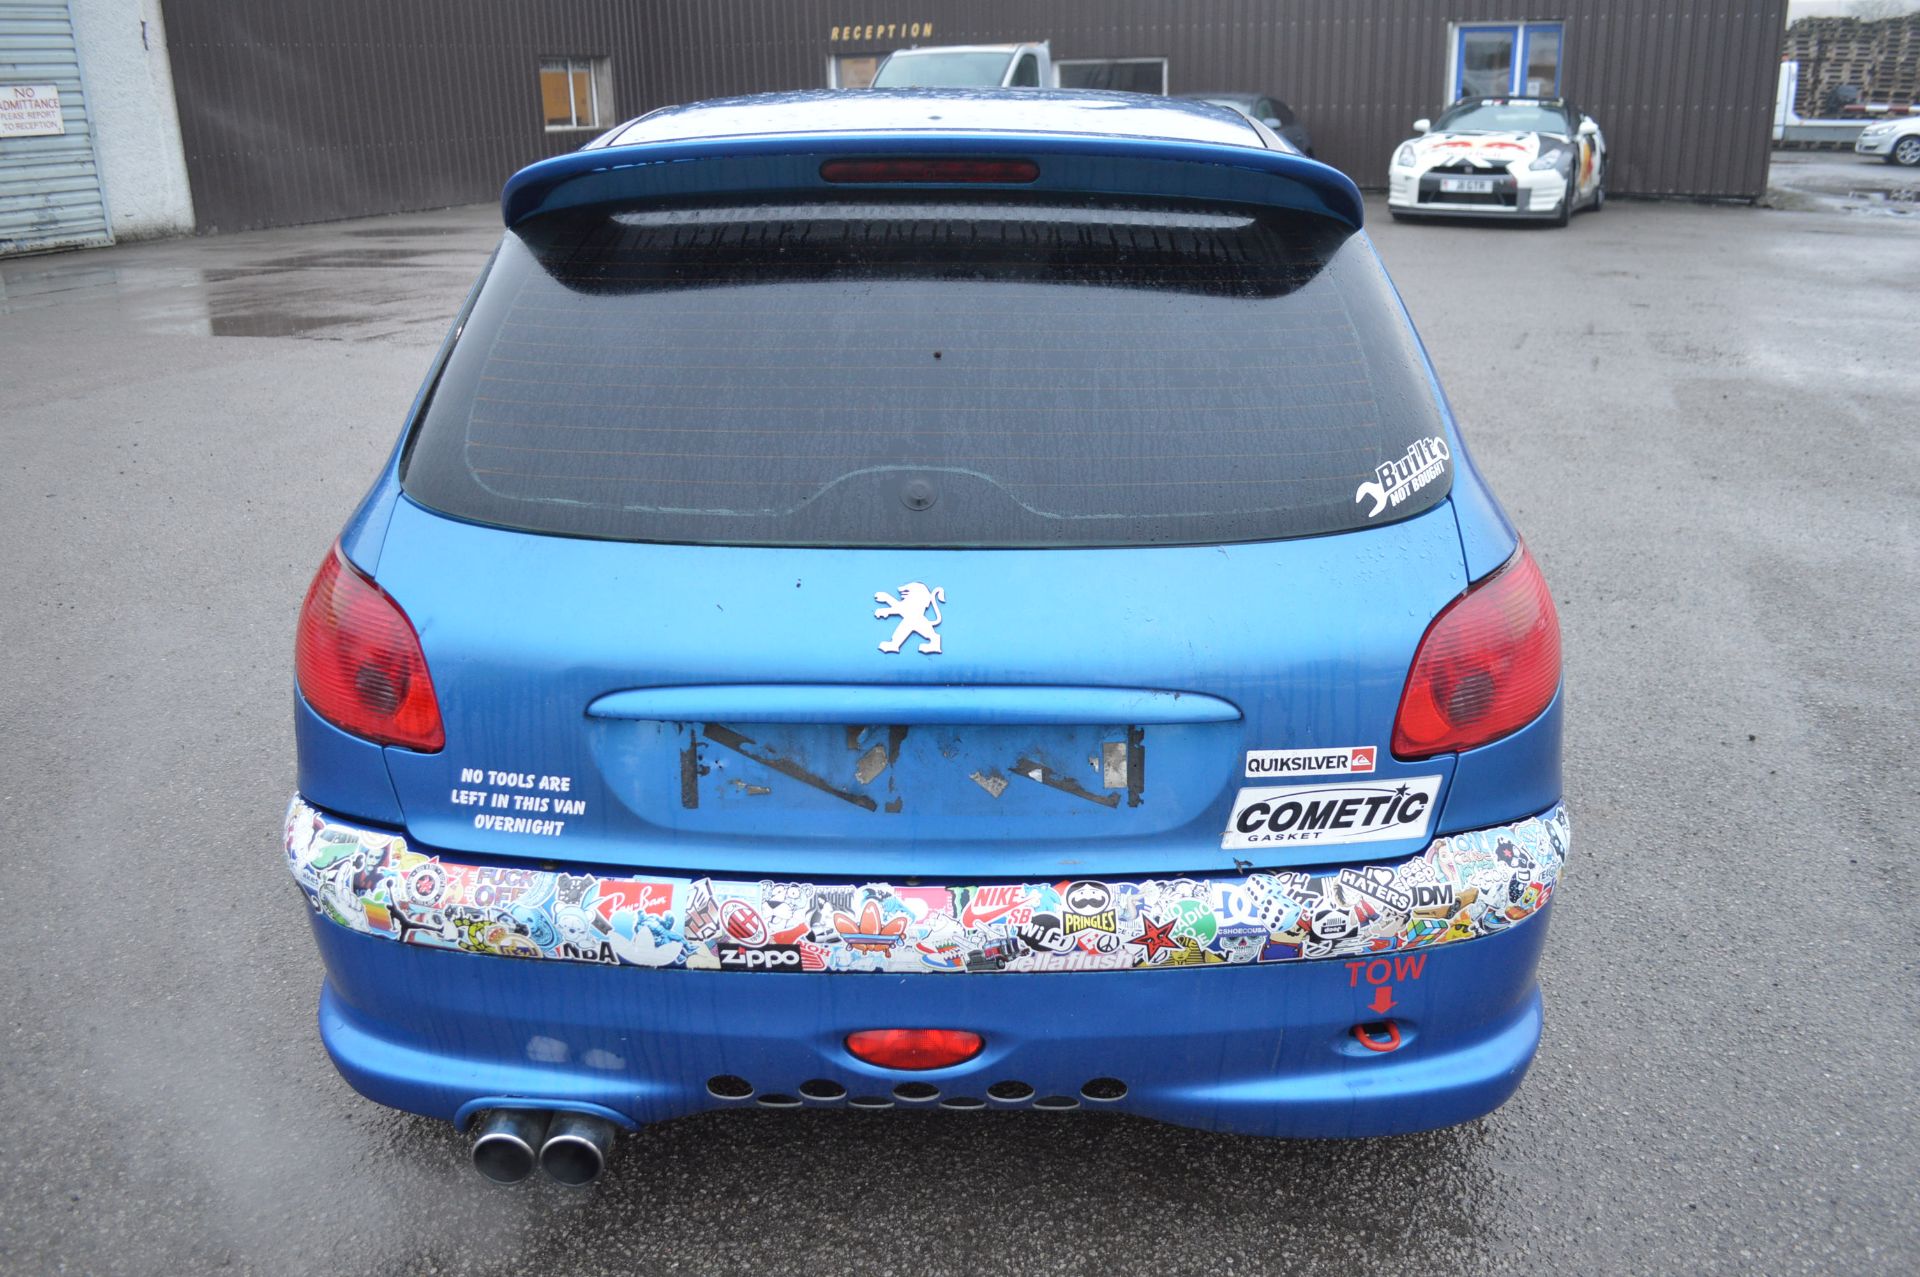 2003/03 REG PEUGEOT 206 GTI 180HP FAST TRACK DAY CAR  HAS THE 'VAN' PANELS FITTED INSTEAD OF REAR - Image 5 of 14